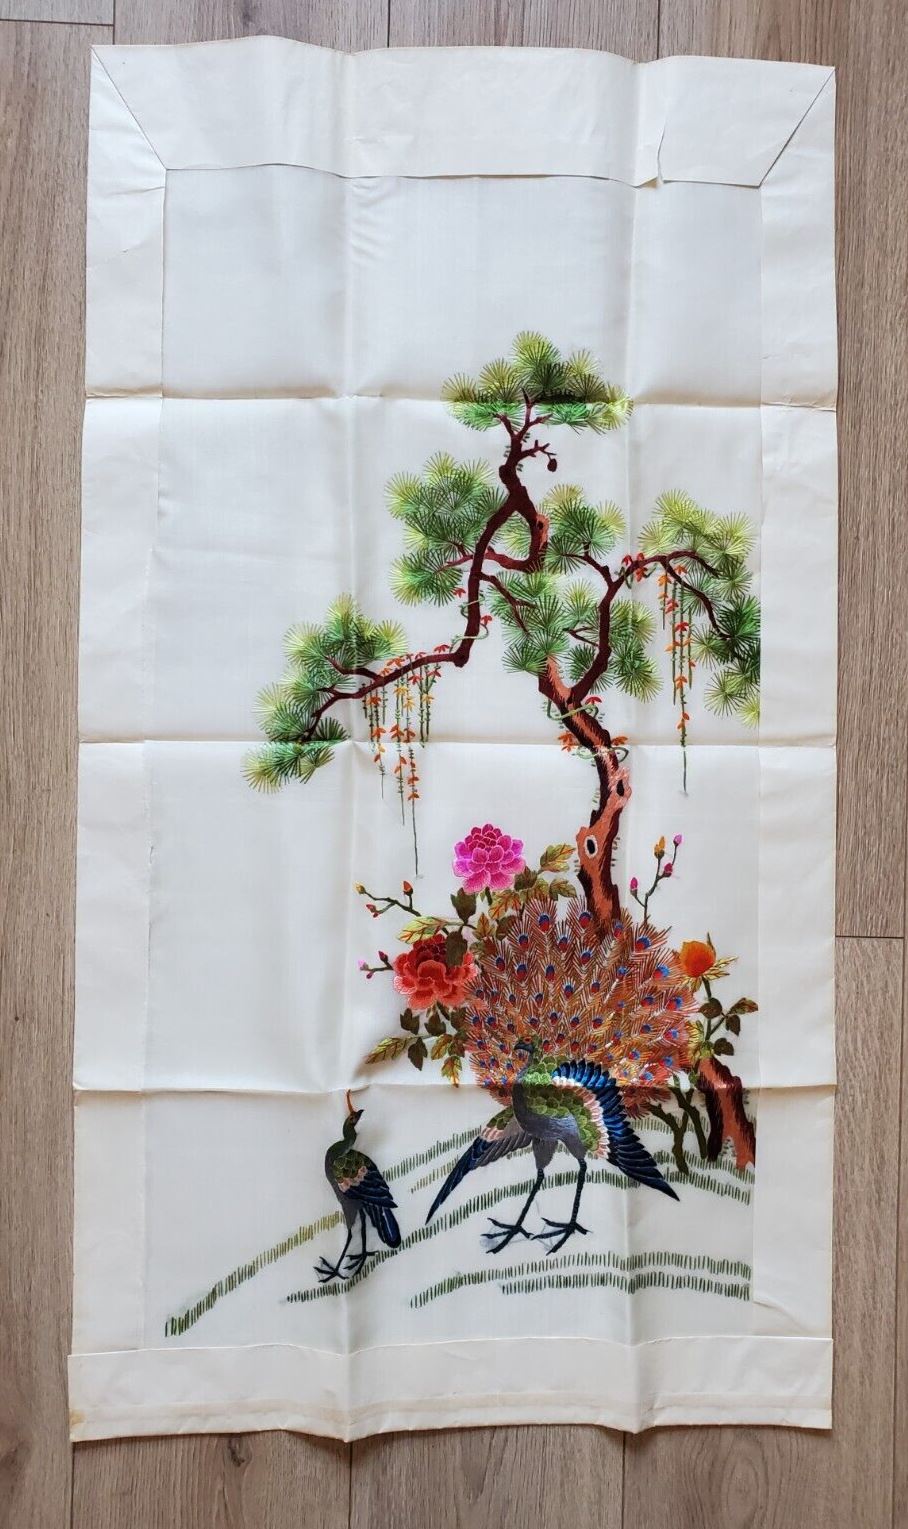 Vintage Asian Silk Embroidery - Never Framed - Peacock - 36